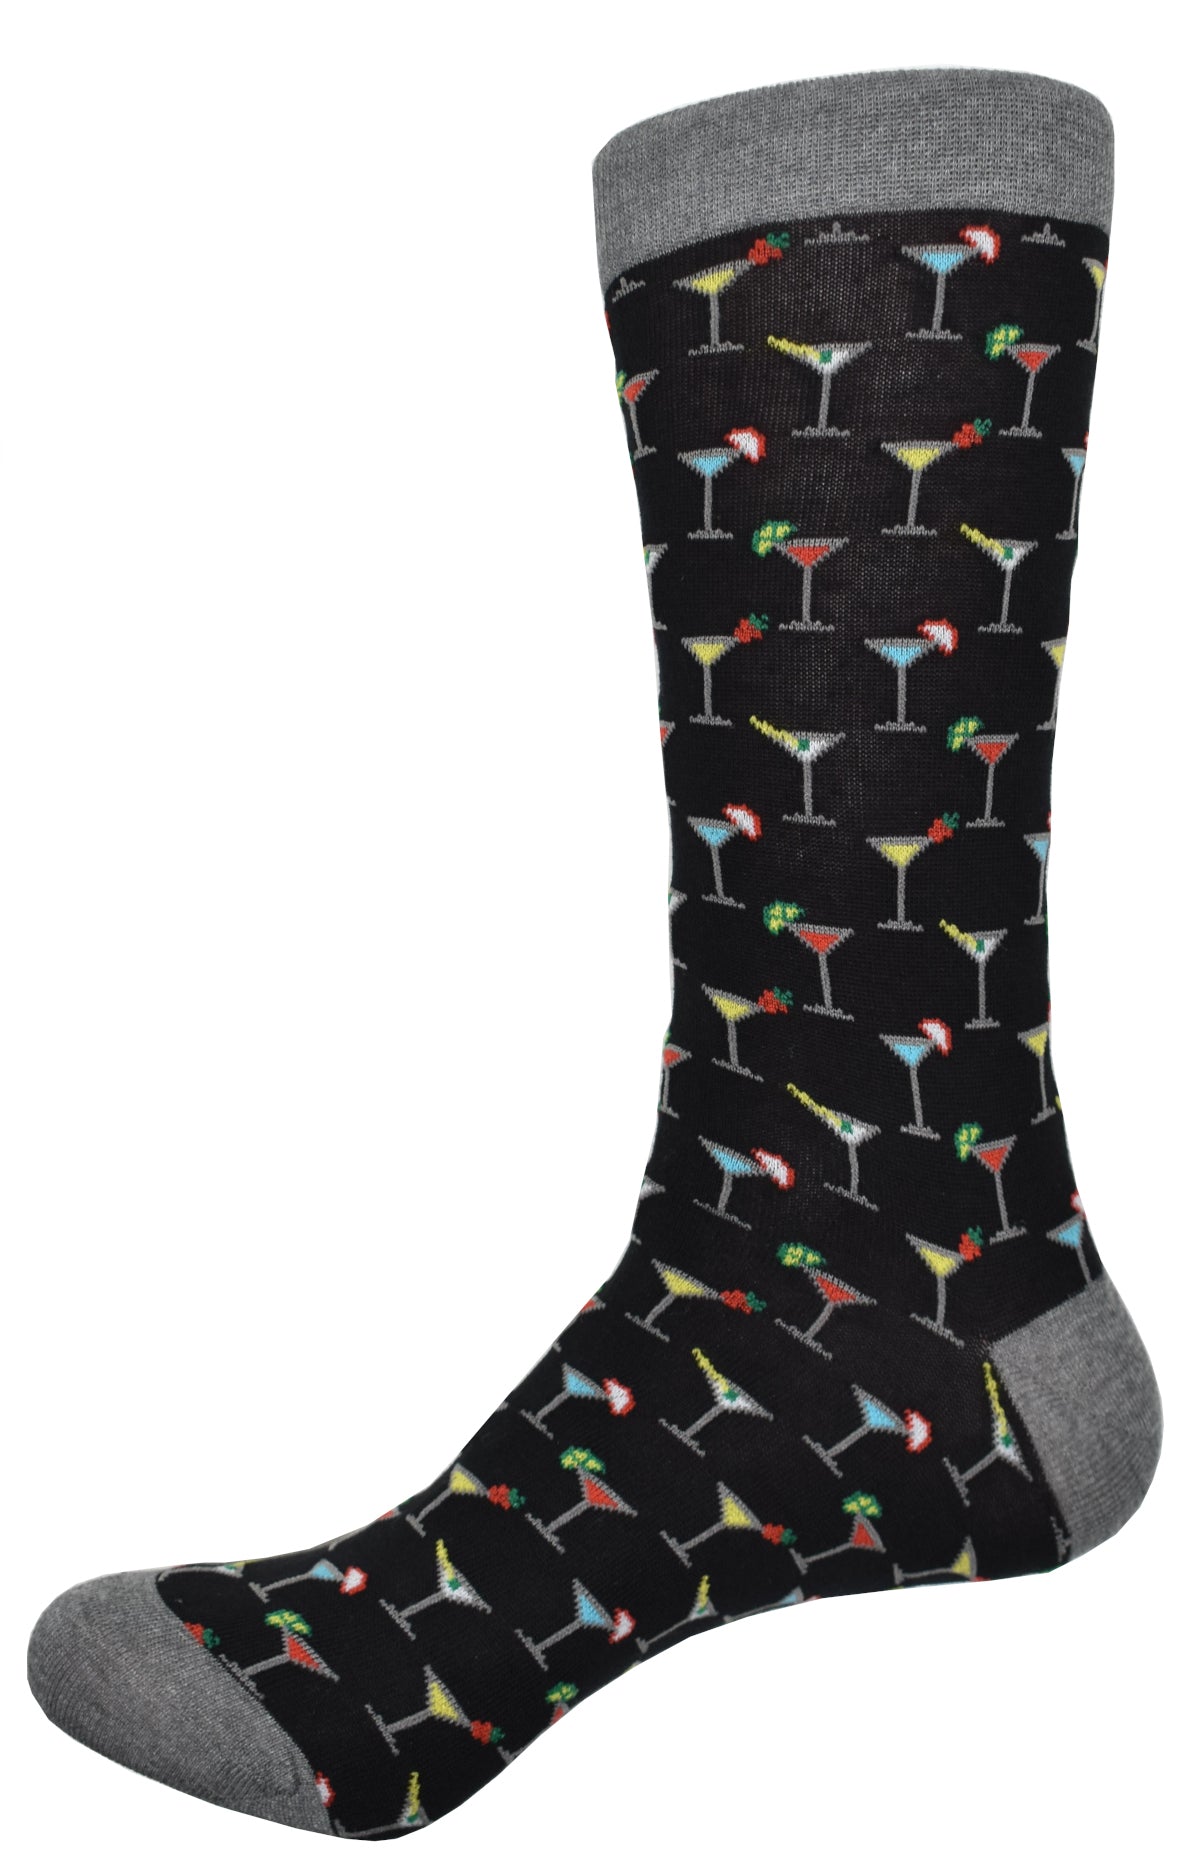 Enjoy an extra splash of style with these ZV1578 Martini Time Socks! Soft cotton microfiber is mercerized for a comfortable feel and vibrant martini designs bring a fun, casual vibe.  One size fits most, 9-12. by Marcello Sport